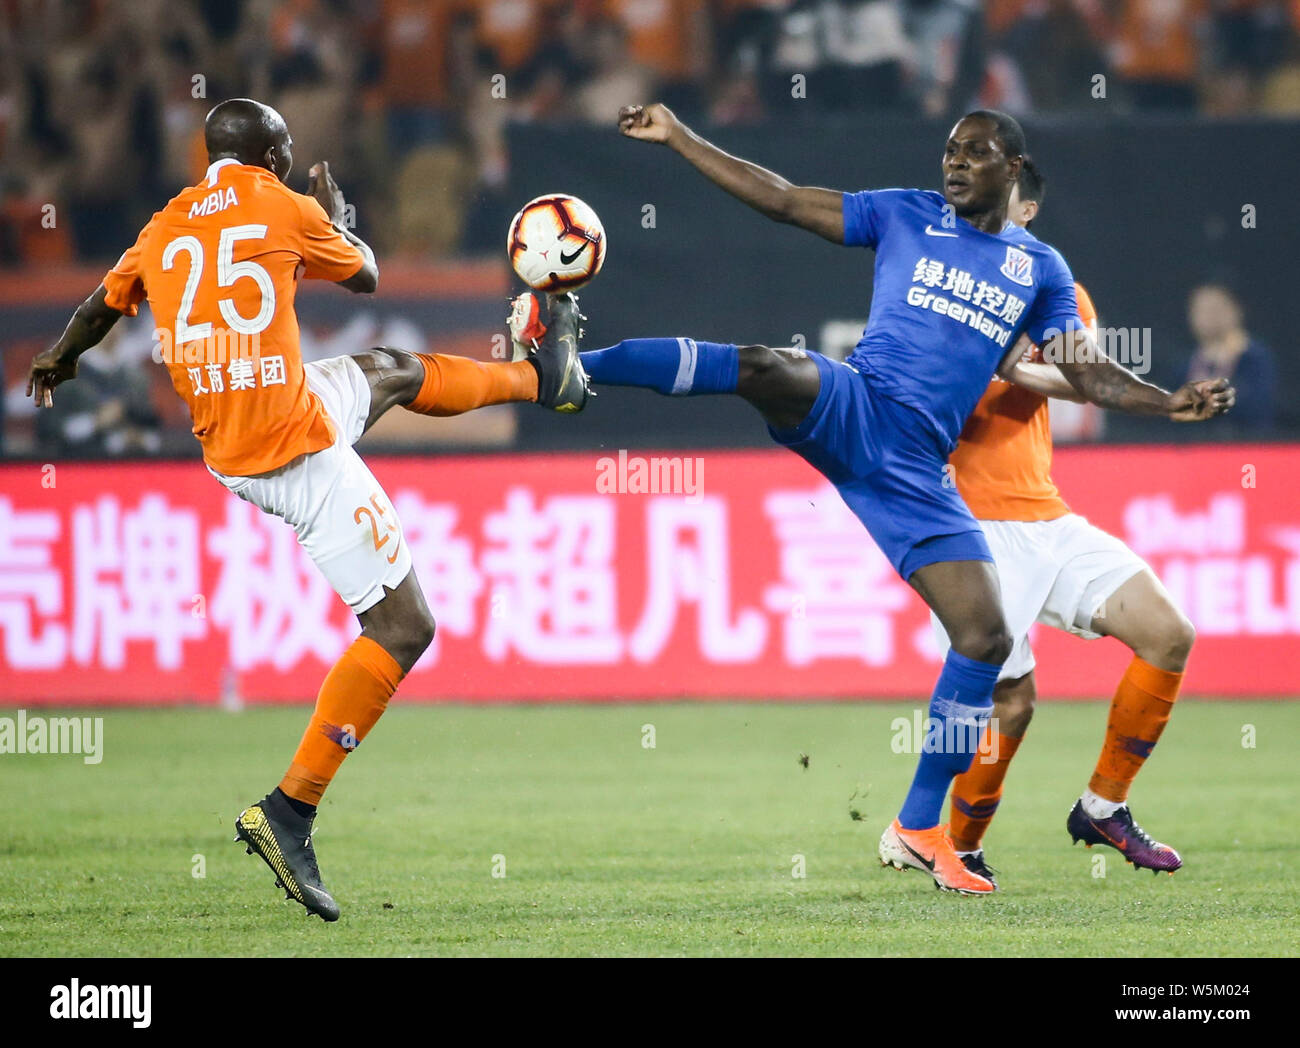 Nigerian football player Odion Ighalo, right, of Shanghai Greenland?Shenhua F.C. challenges Cameroonian football player Stephane Mbia Etoundi of Wuhan Stock Photo